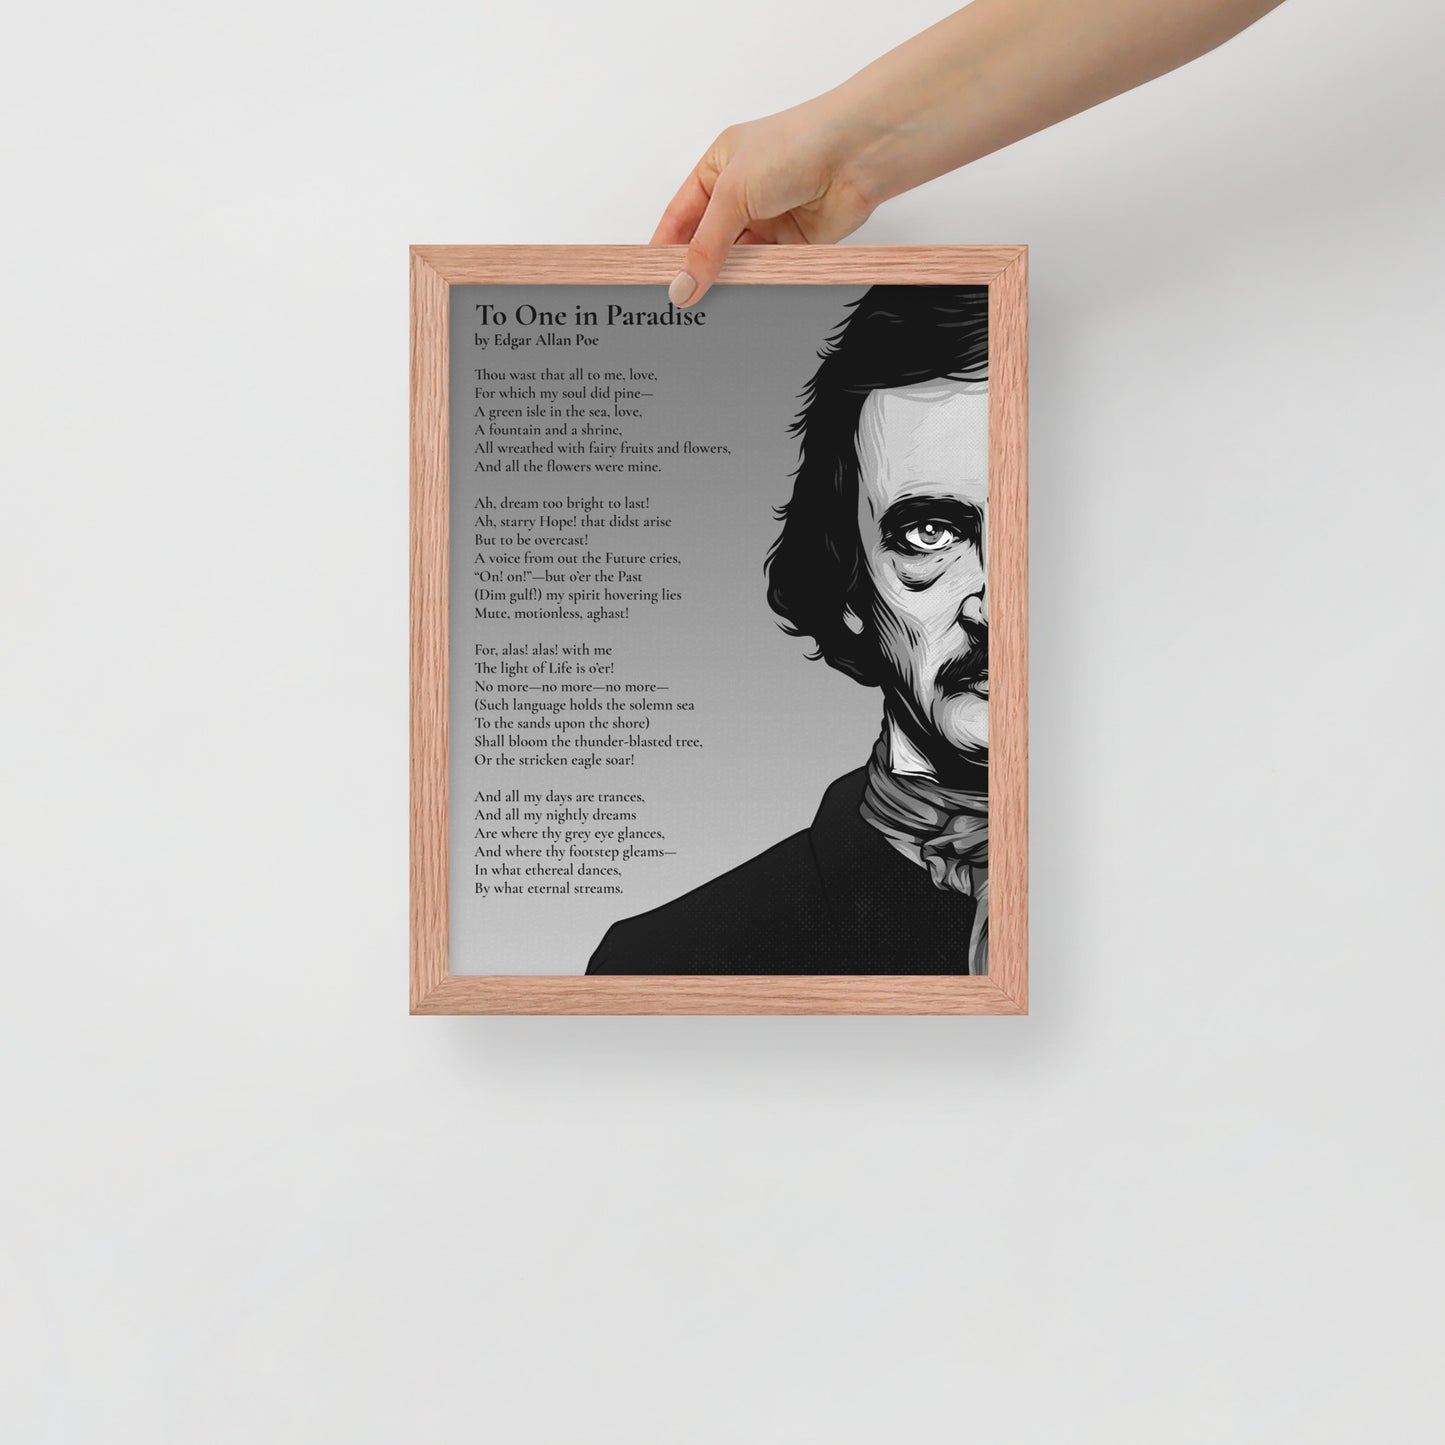 Edgar Allan Poe's 'To One in Paradise' Framed Matted Poster - 11 x 14 Red Oak Frame